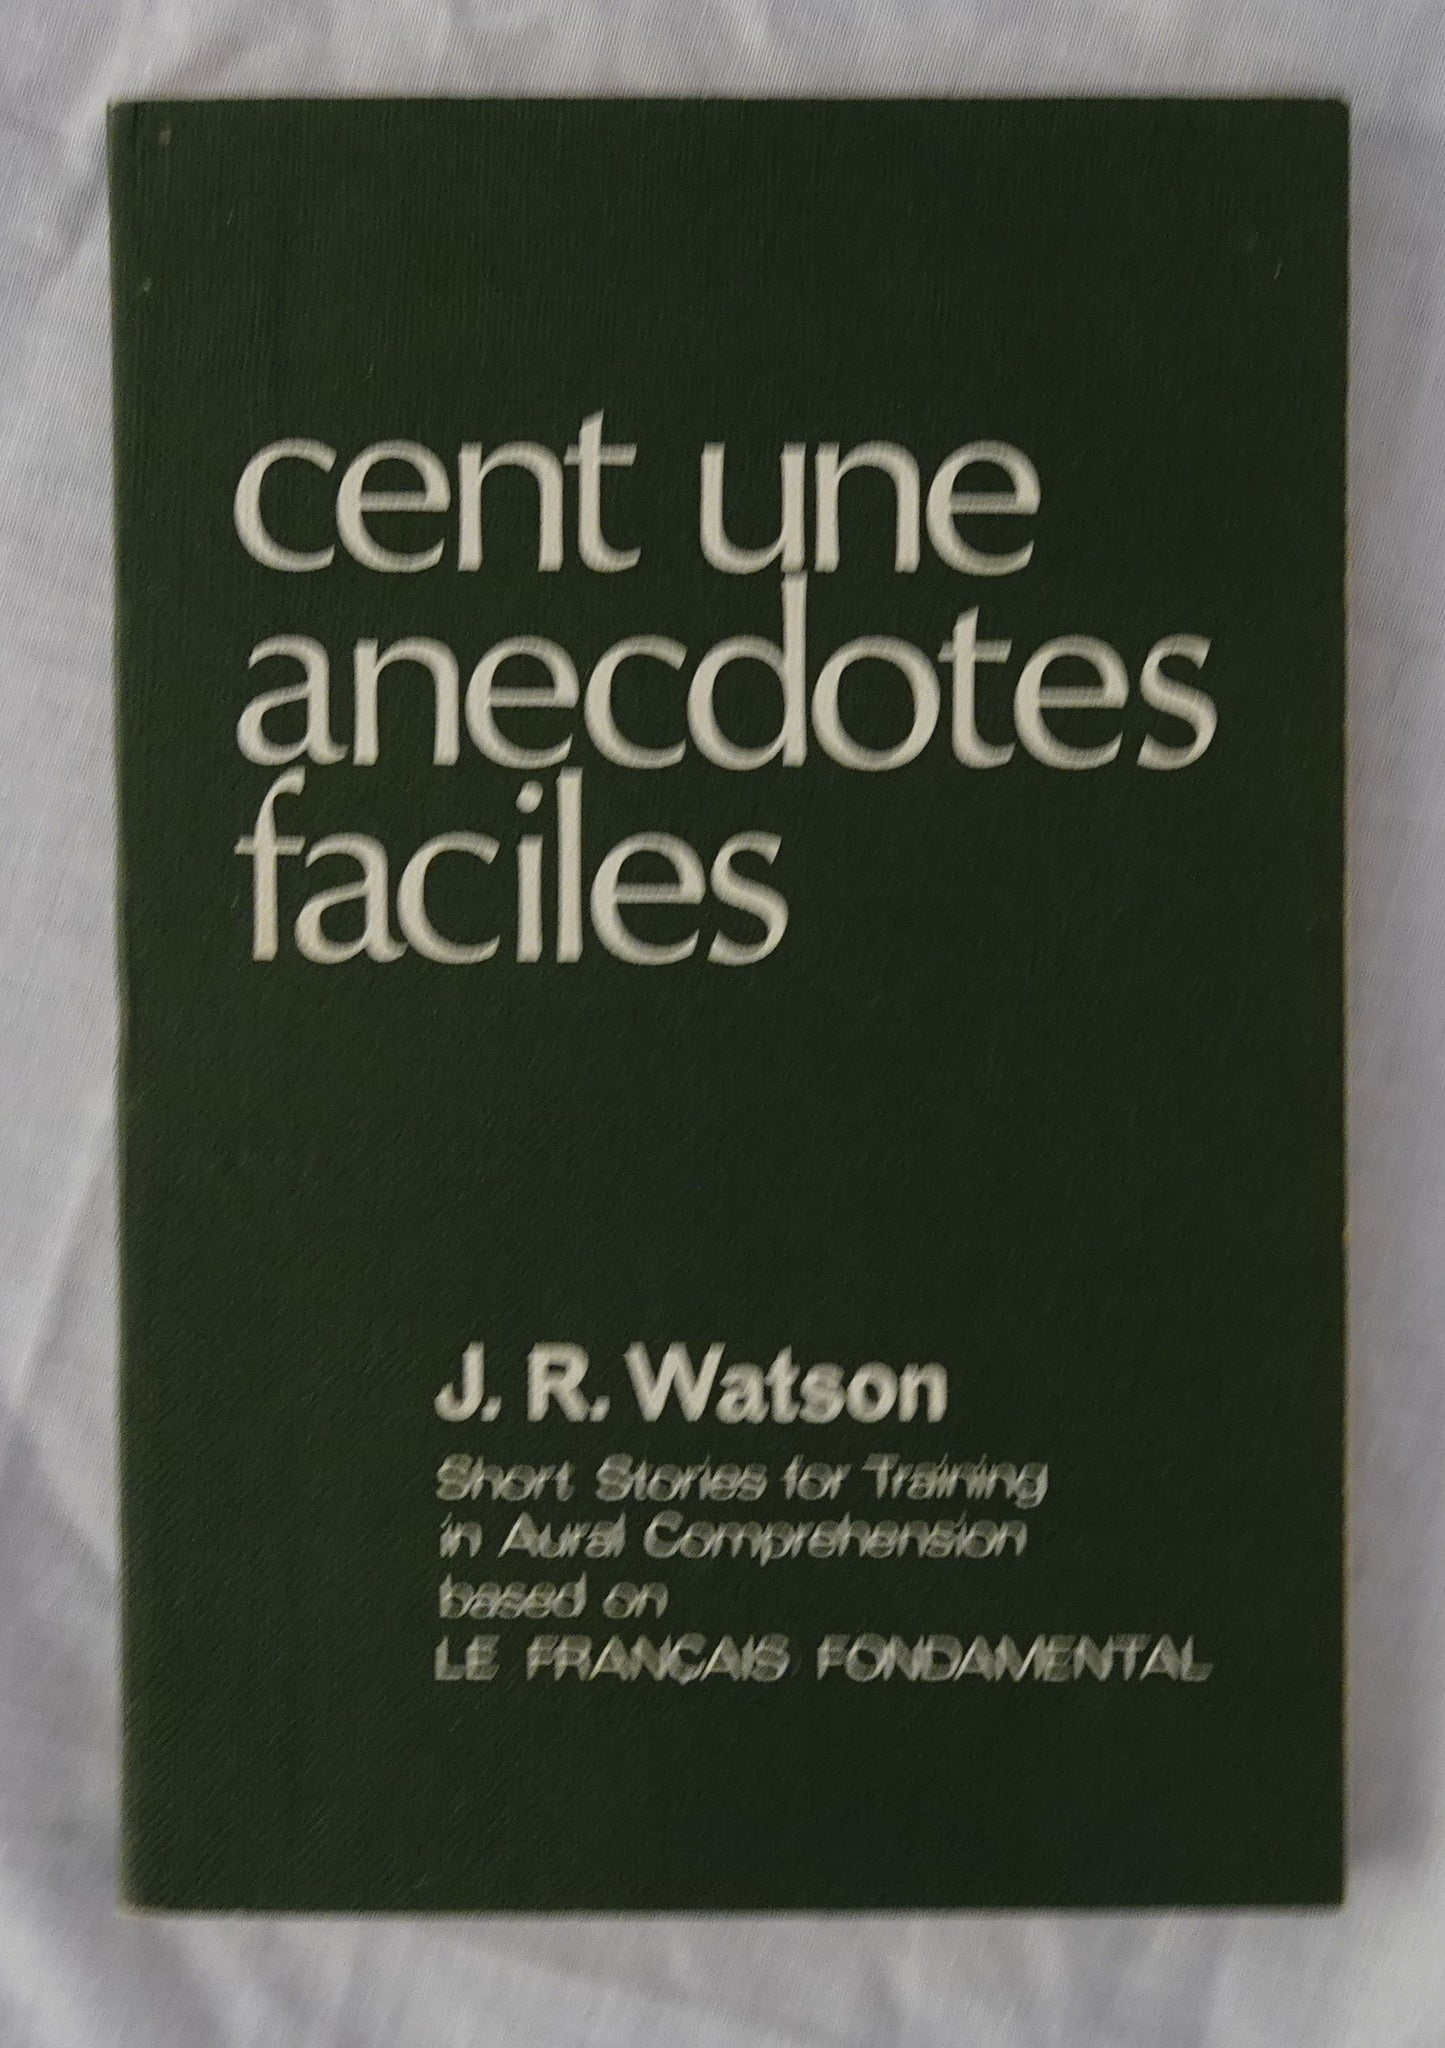 Cent Une Anecdotes Faciles  Stories old and new retold in the vocabulary of the francais fondamental  by J. R. Watson